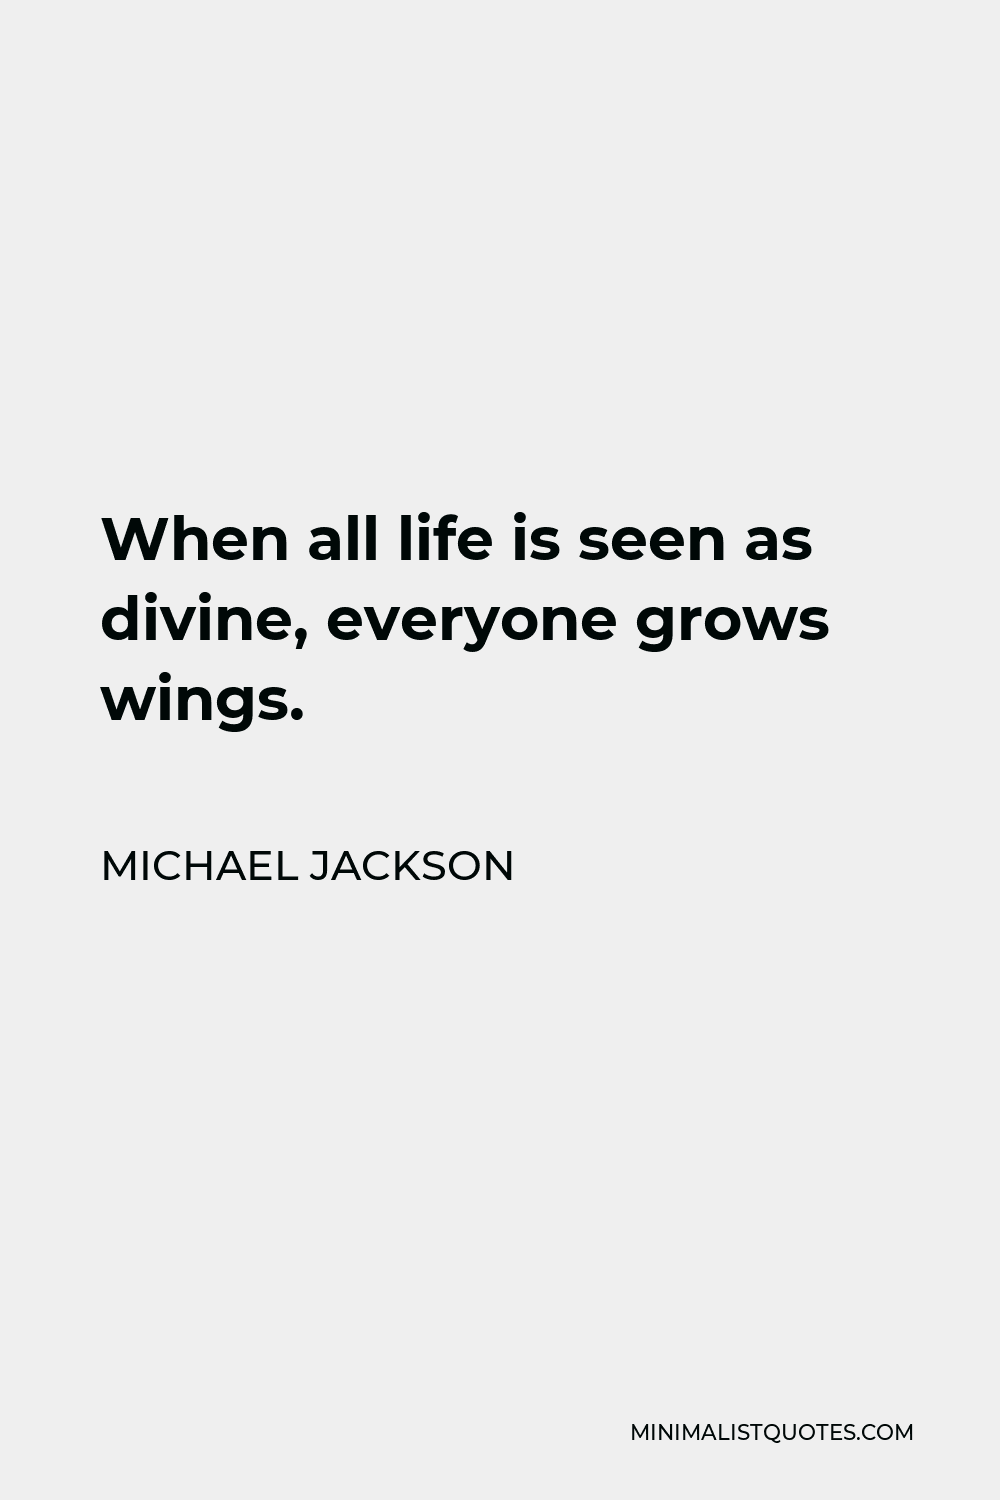 Michael Jackson Quote - When all life is seen as divine, everyone grows wings.